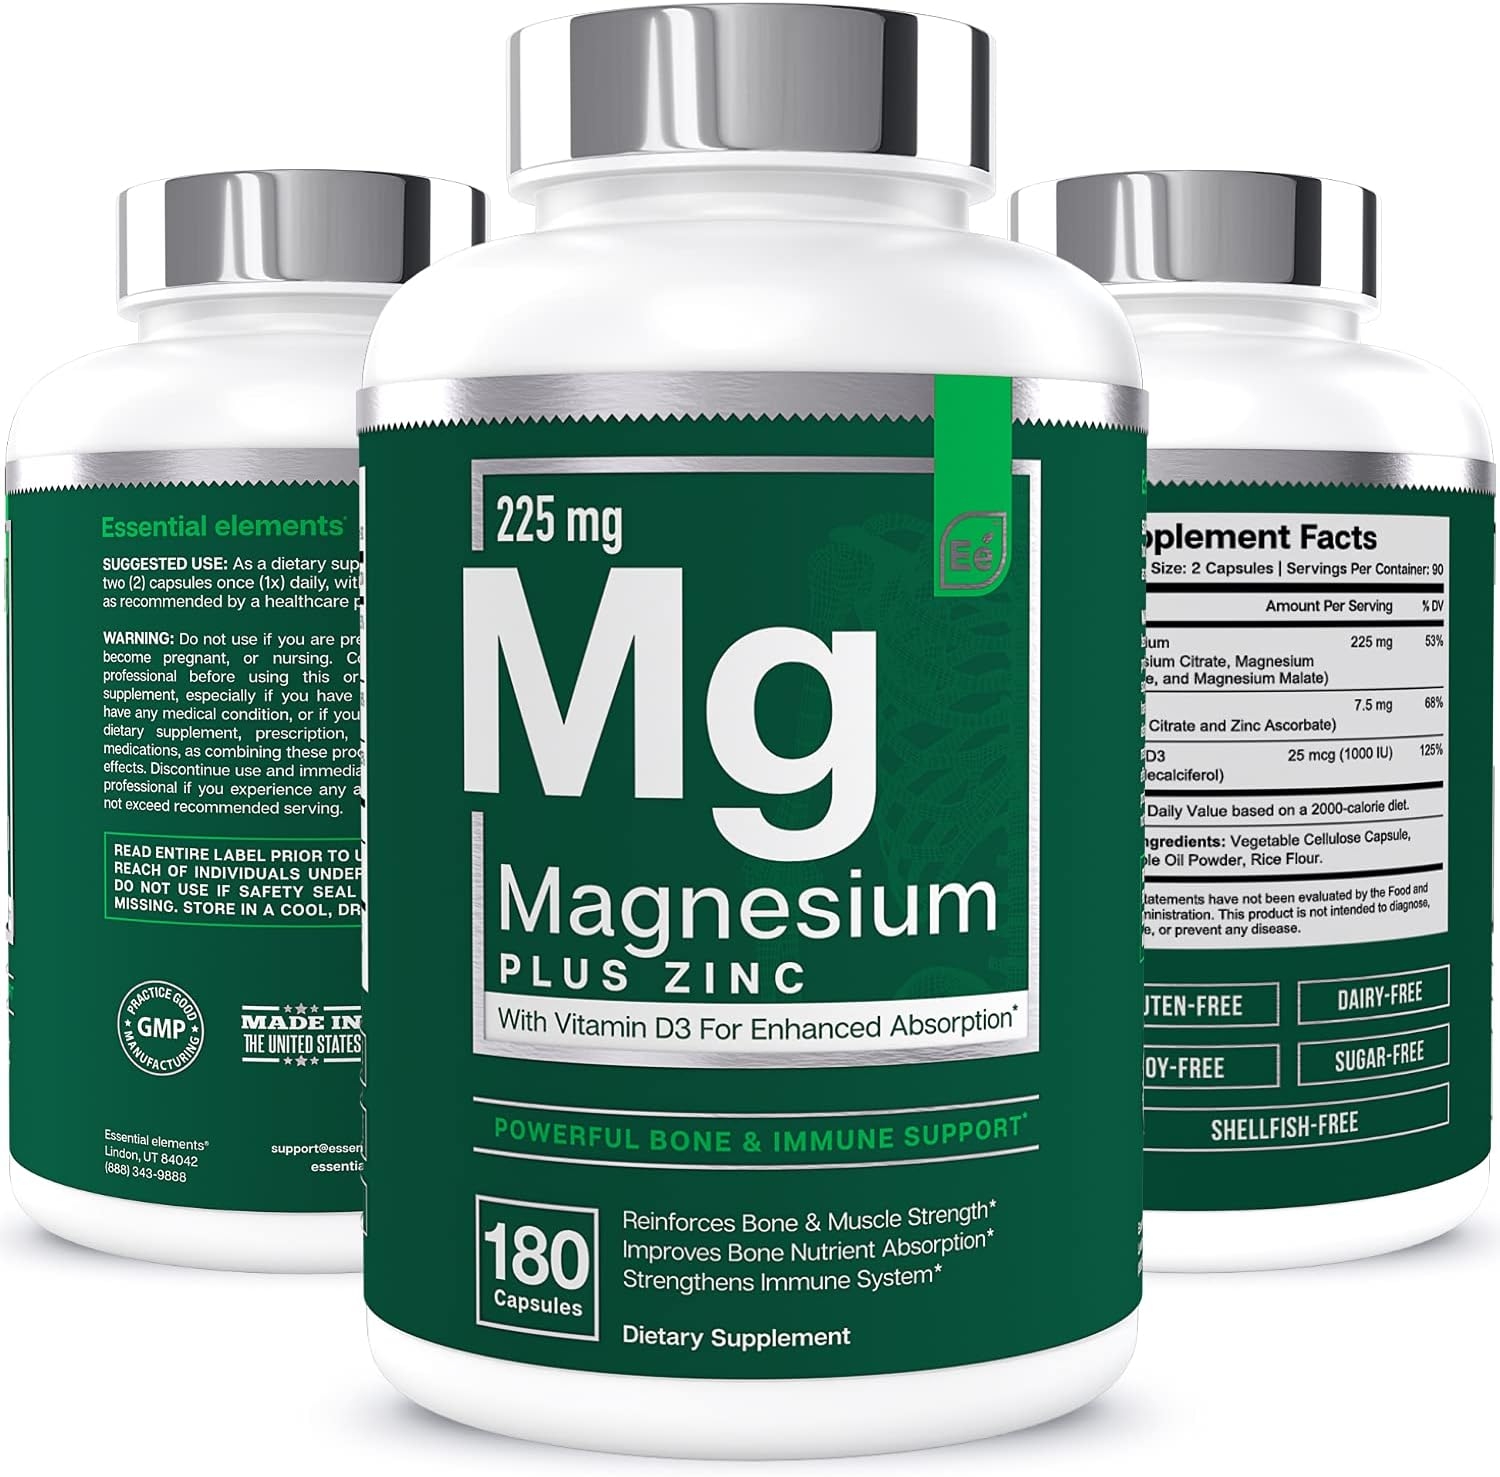 Magnesium + Zinc with Vitamin D3 by Essential Elements - Immune & Bone Support | Magnesium Glycinate, Citrate, Malate - Highly Bioavailable - 3 Month Supply